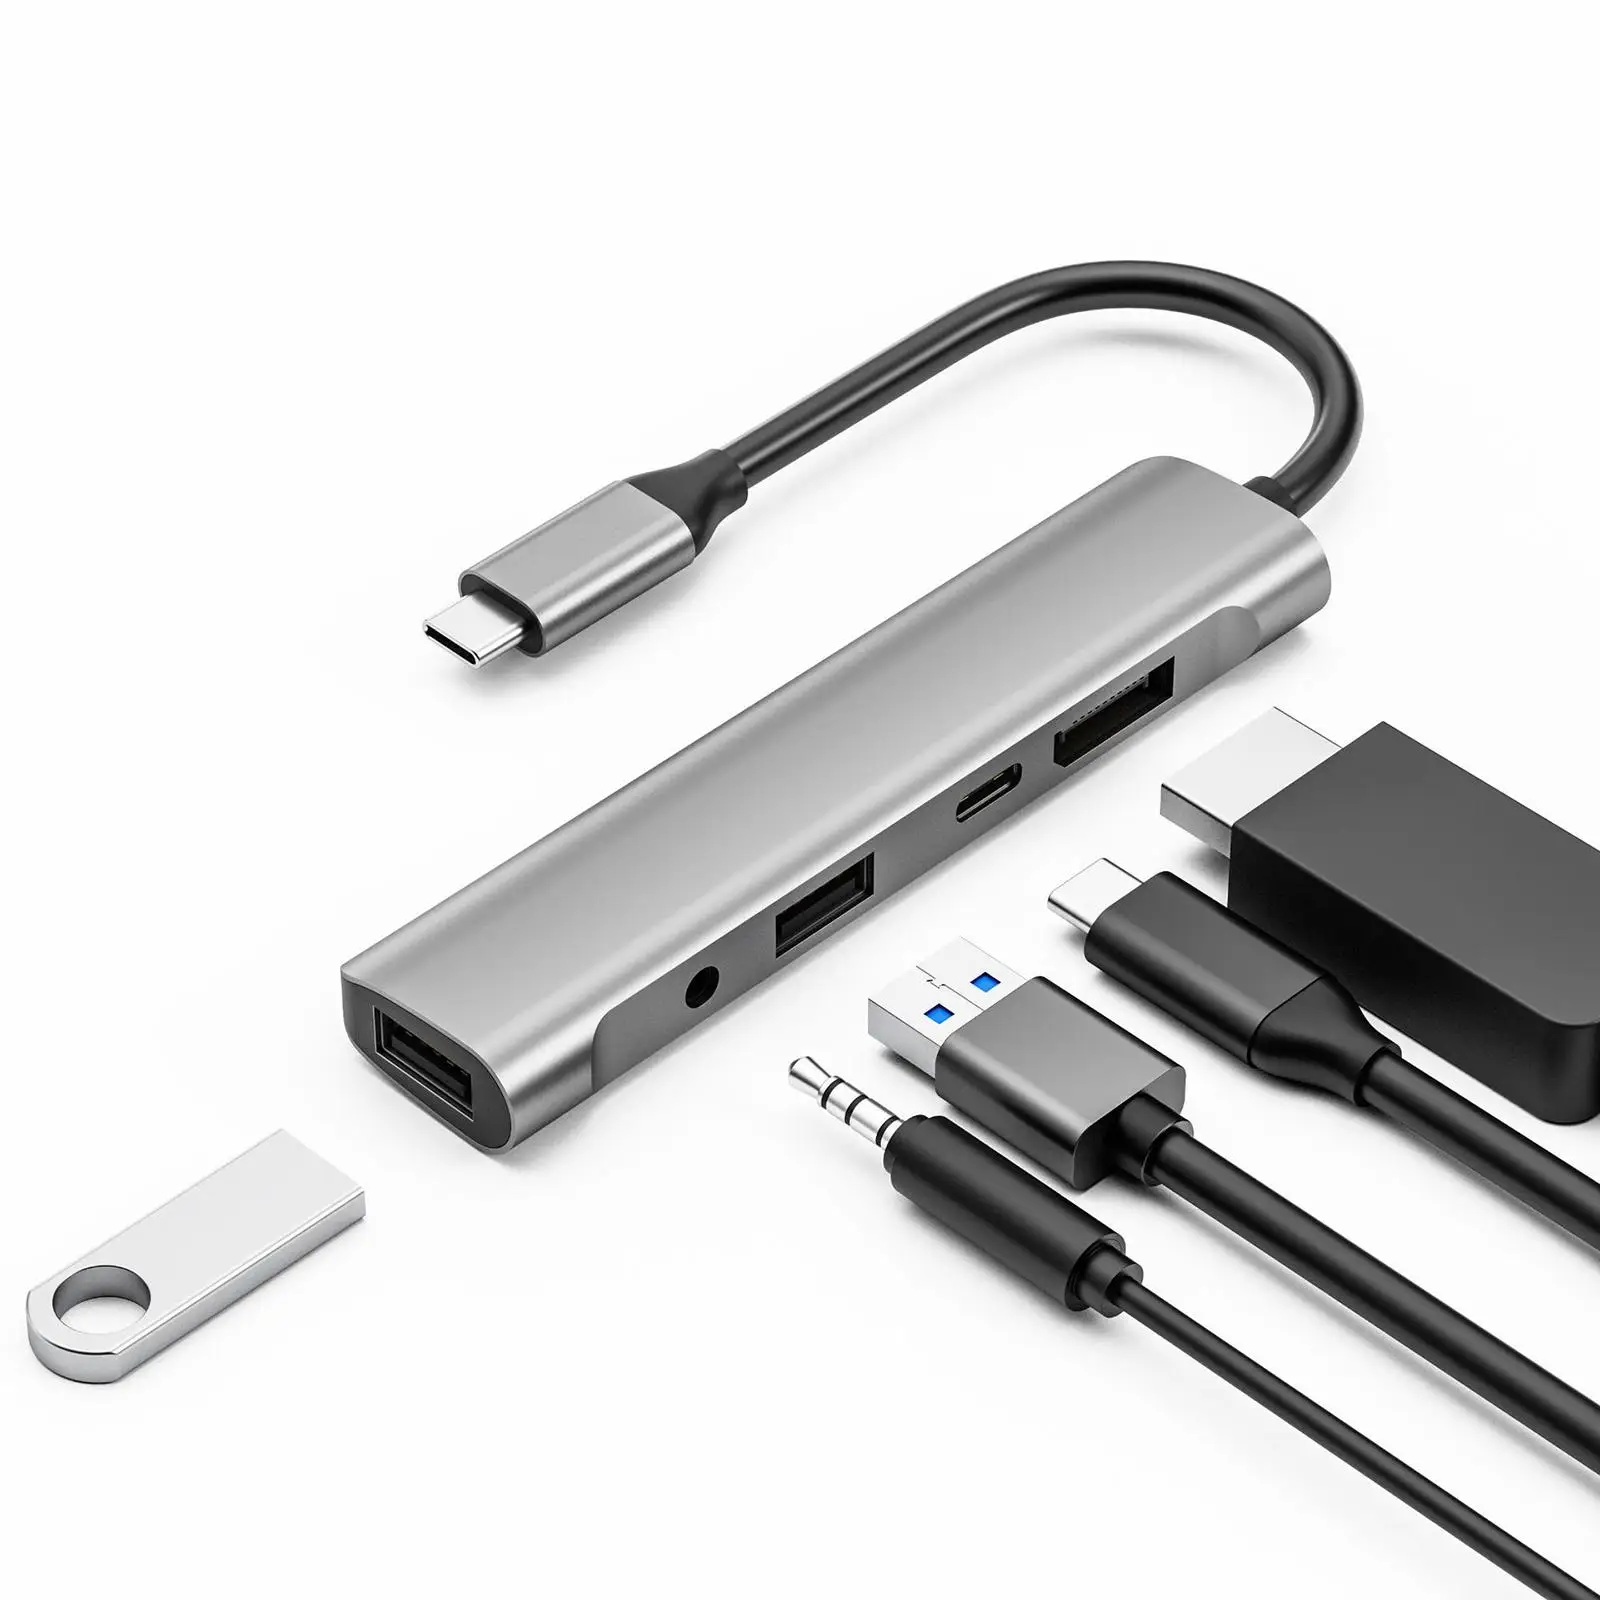 Slim 5 in 1 USB C Hub Dual USB 2.0 60W PD Charger Multiport Adapters USB C to Display Adapter for Monitor Tablets Microphone